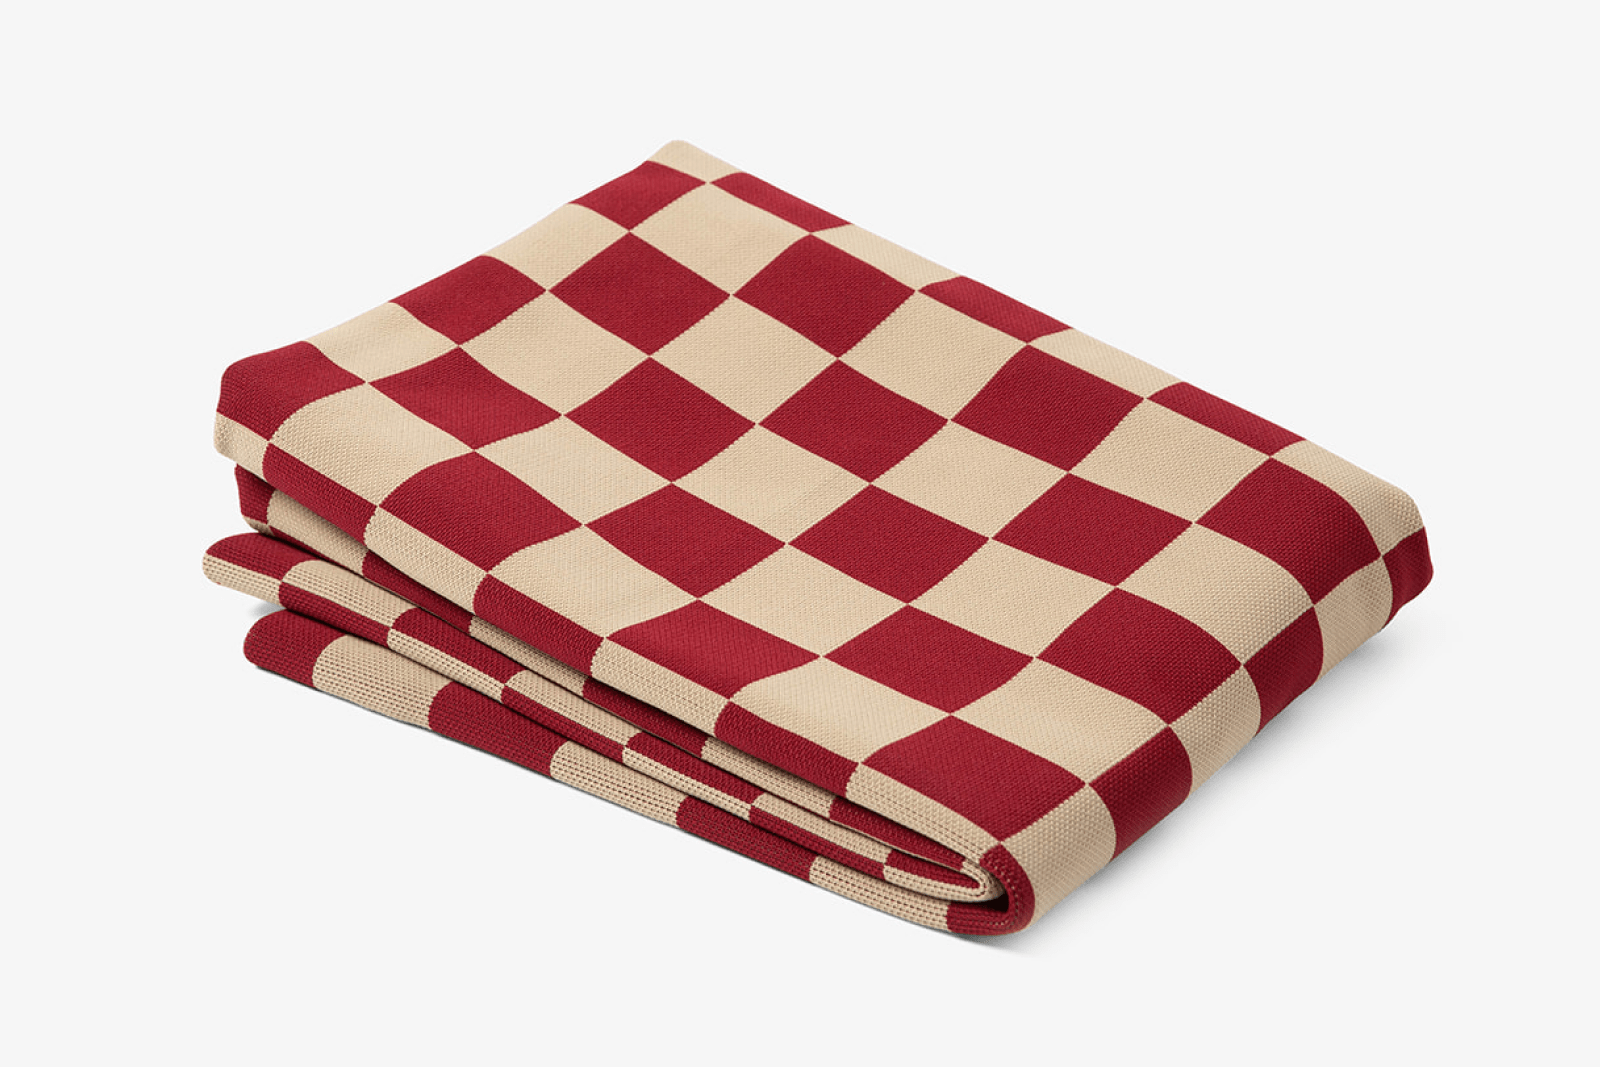 LAY LO™ Pets LAY LO Pets - Red Checker Dog Bed or Bed Cover Lay Lo Pets